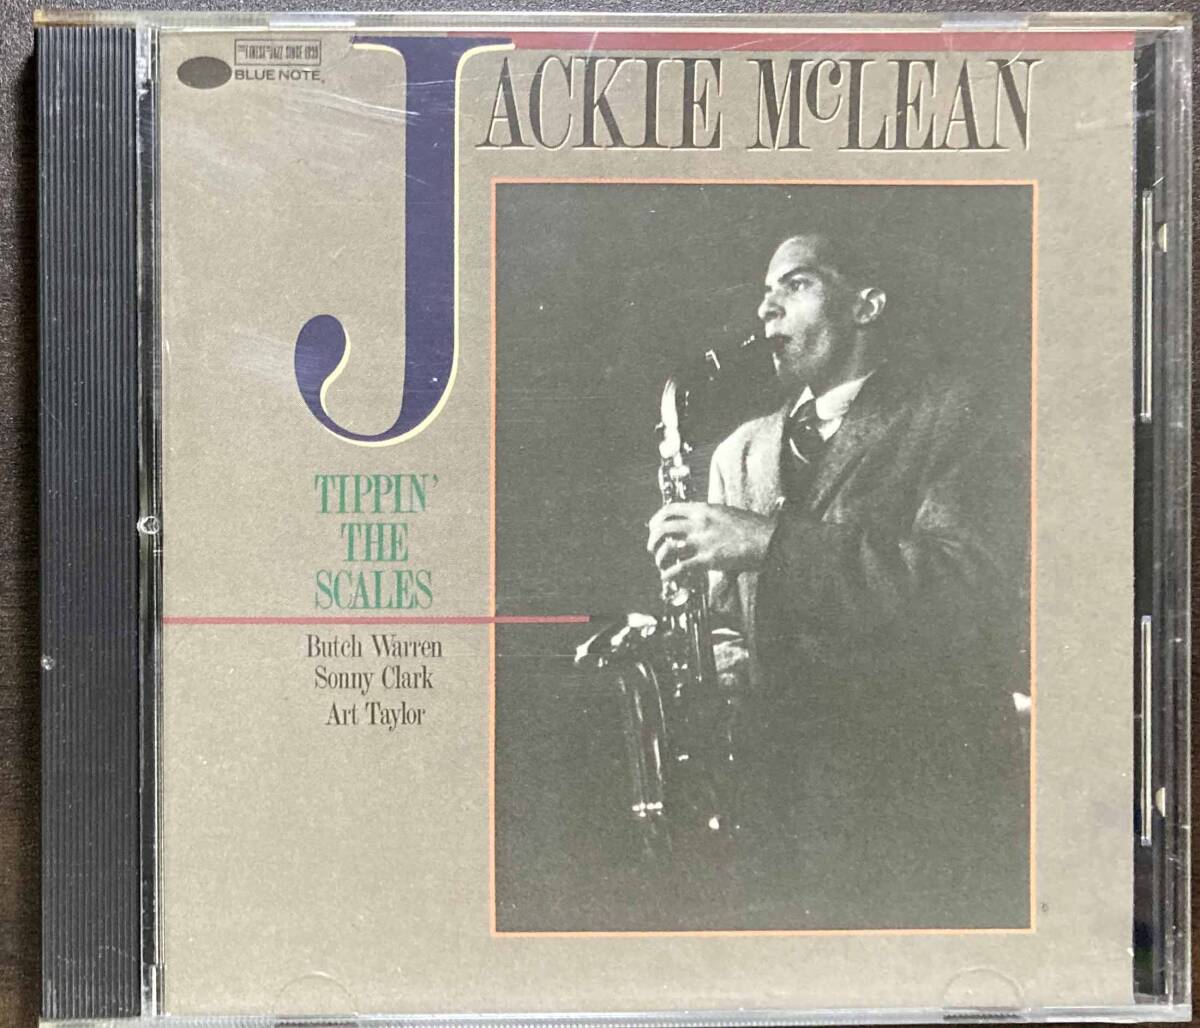 Jackie McLean / Tippin' the Scales 中古CD　輸入盤　BLUE NOTE_画像2